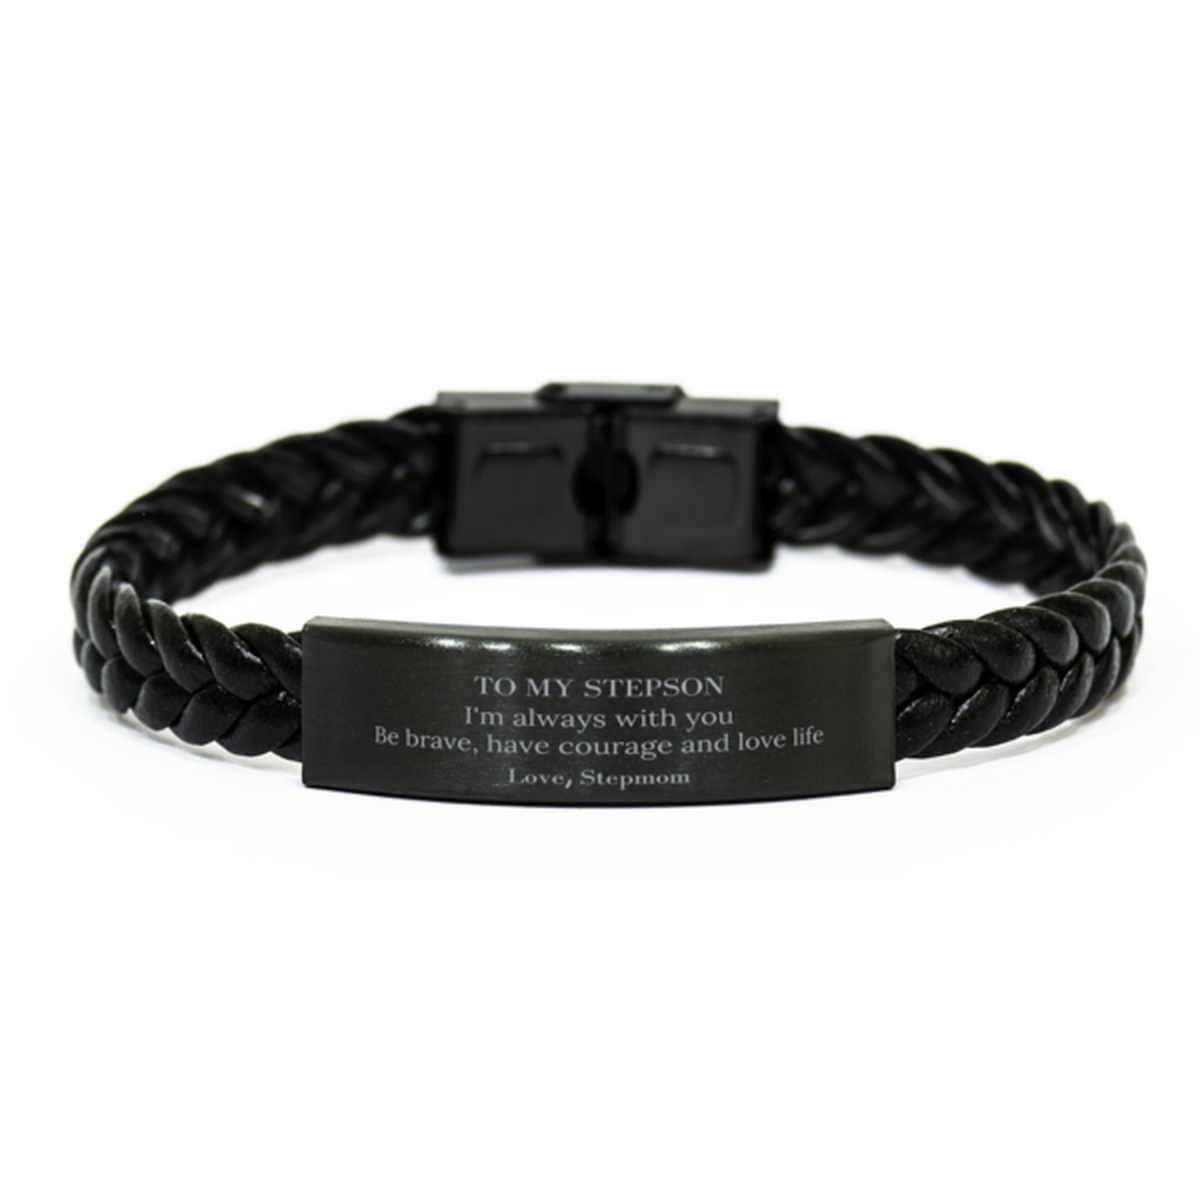 To My Stepson Gifts from Stepmom, Unique Braided Leather Bracelet Inspirational Christmas Birthday Graduation Gifts for Stepson I'm always with you. Be brave, have courage and love life. Love, Stepmom